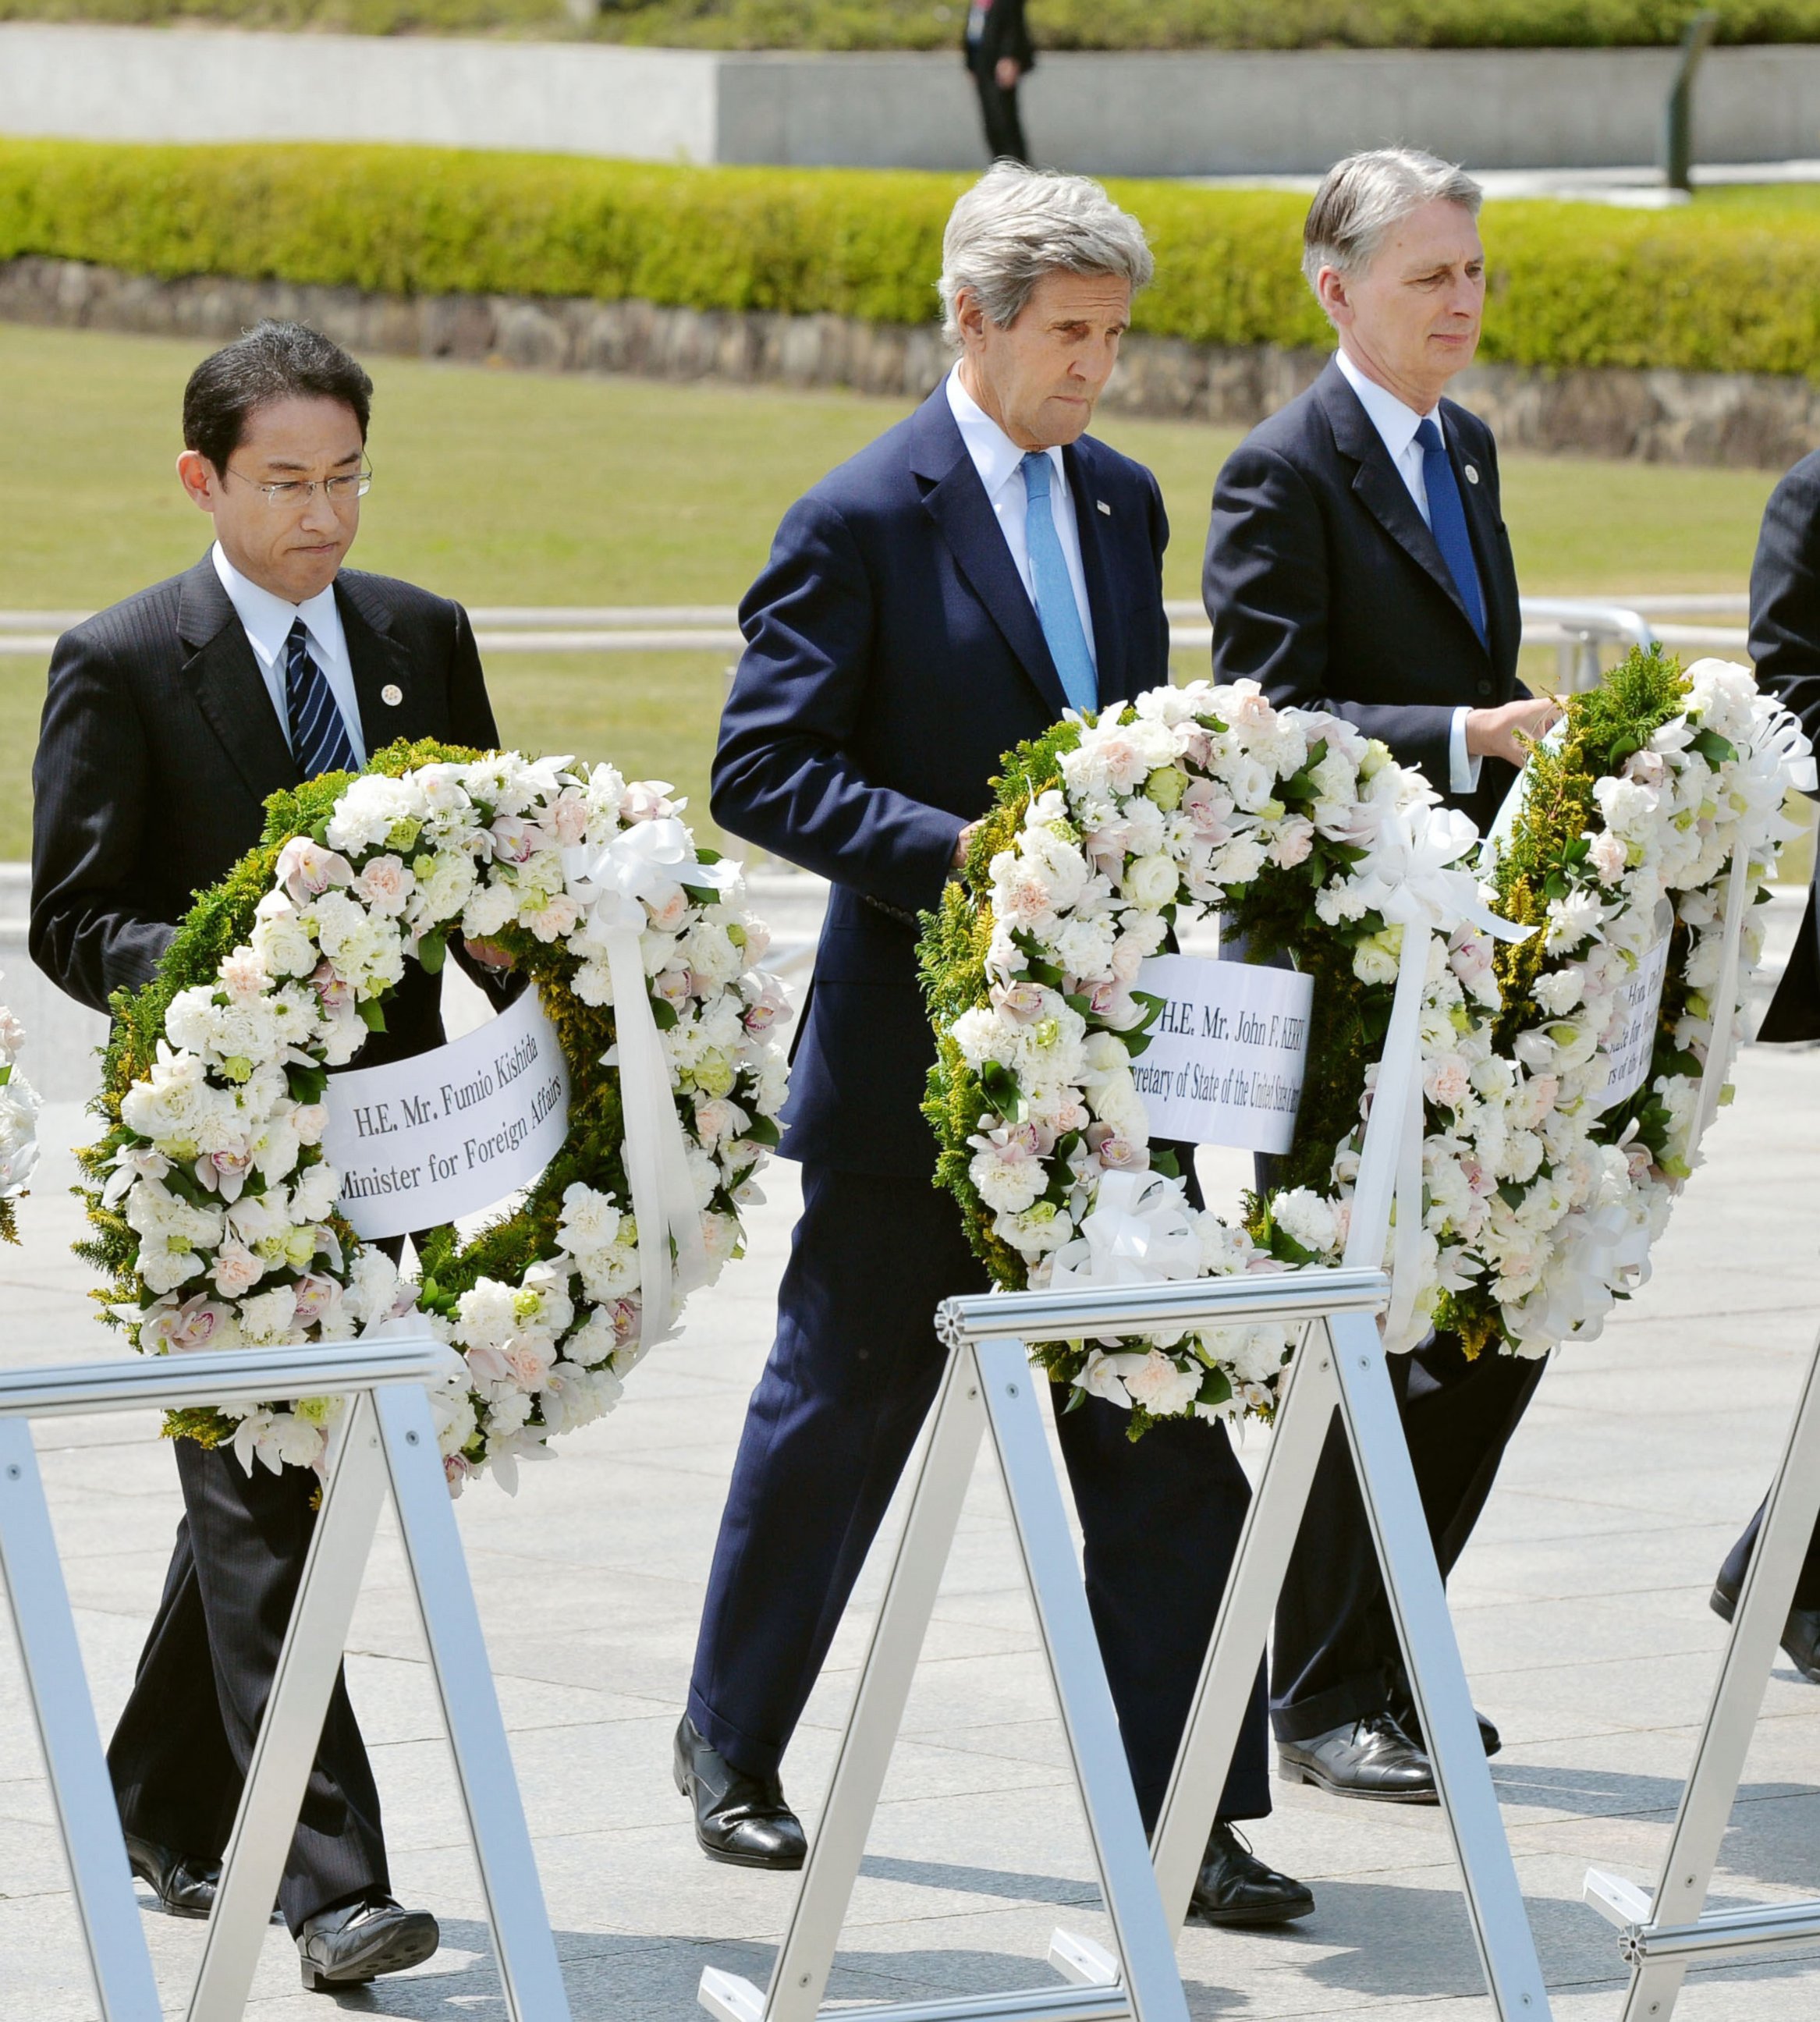 PHOTO: From left, Japan's Foreign Minister Fumio Kishida, U.S. Secretary of State John Kerry and Britain's Foreign Minister Philip Hammond carry wreaths to offer at the cenotaph at Hiroshima Peace Memorial Park in Hiroshima, western Japan, April 11, 2016.